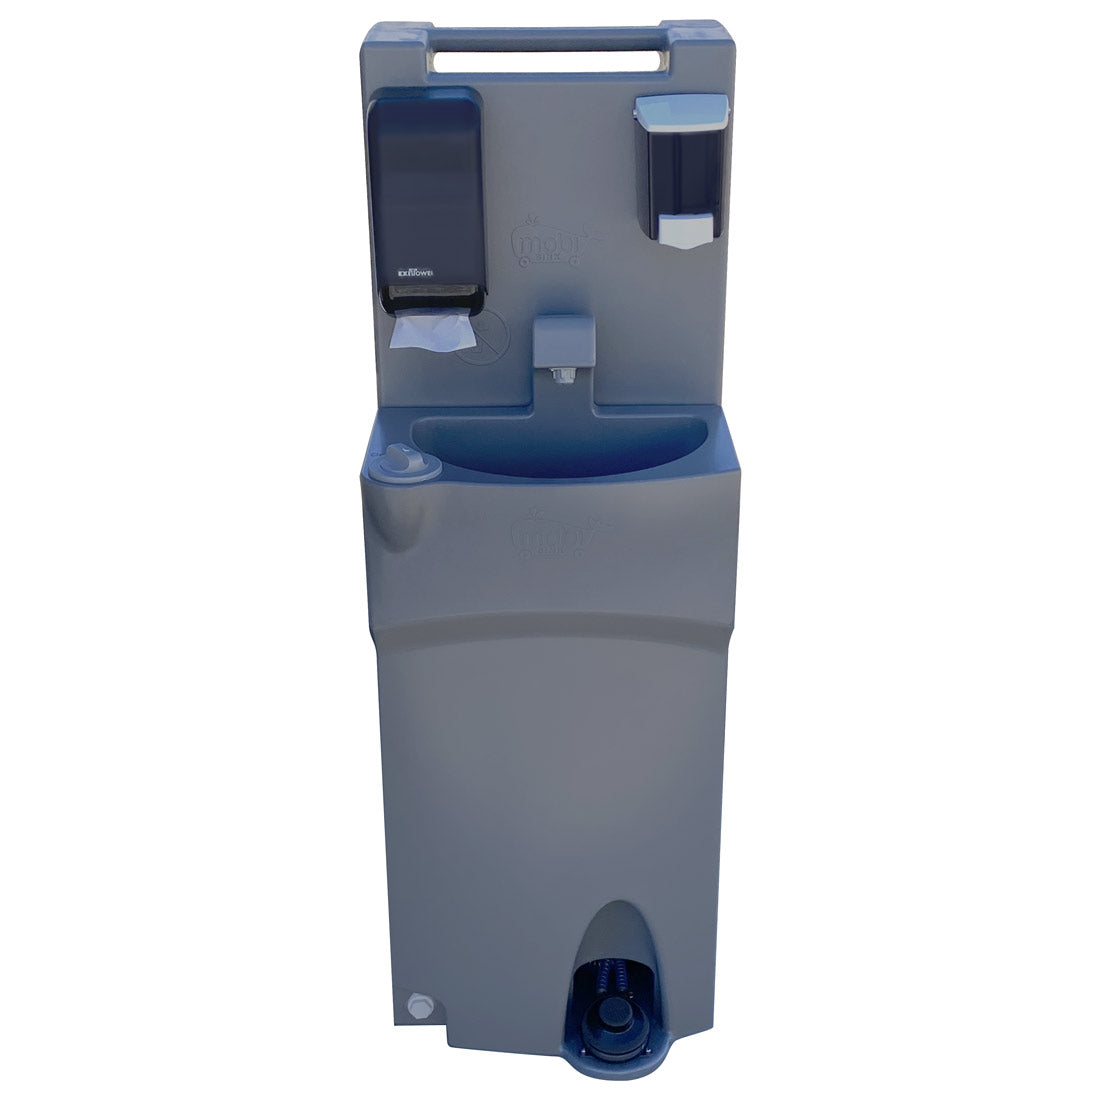 MOBI Portable Sink Hand Washing Station, Non-Heated, Indoor, Outdoor, Heavy-Duty Design - MOBI-2